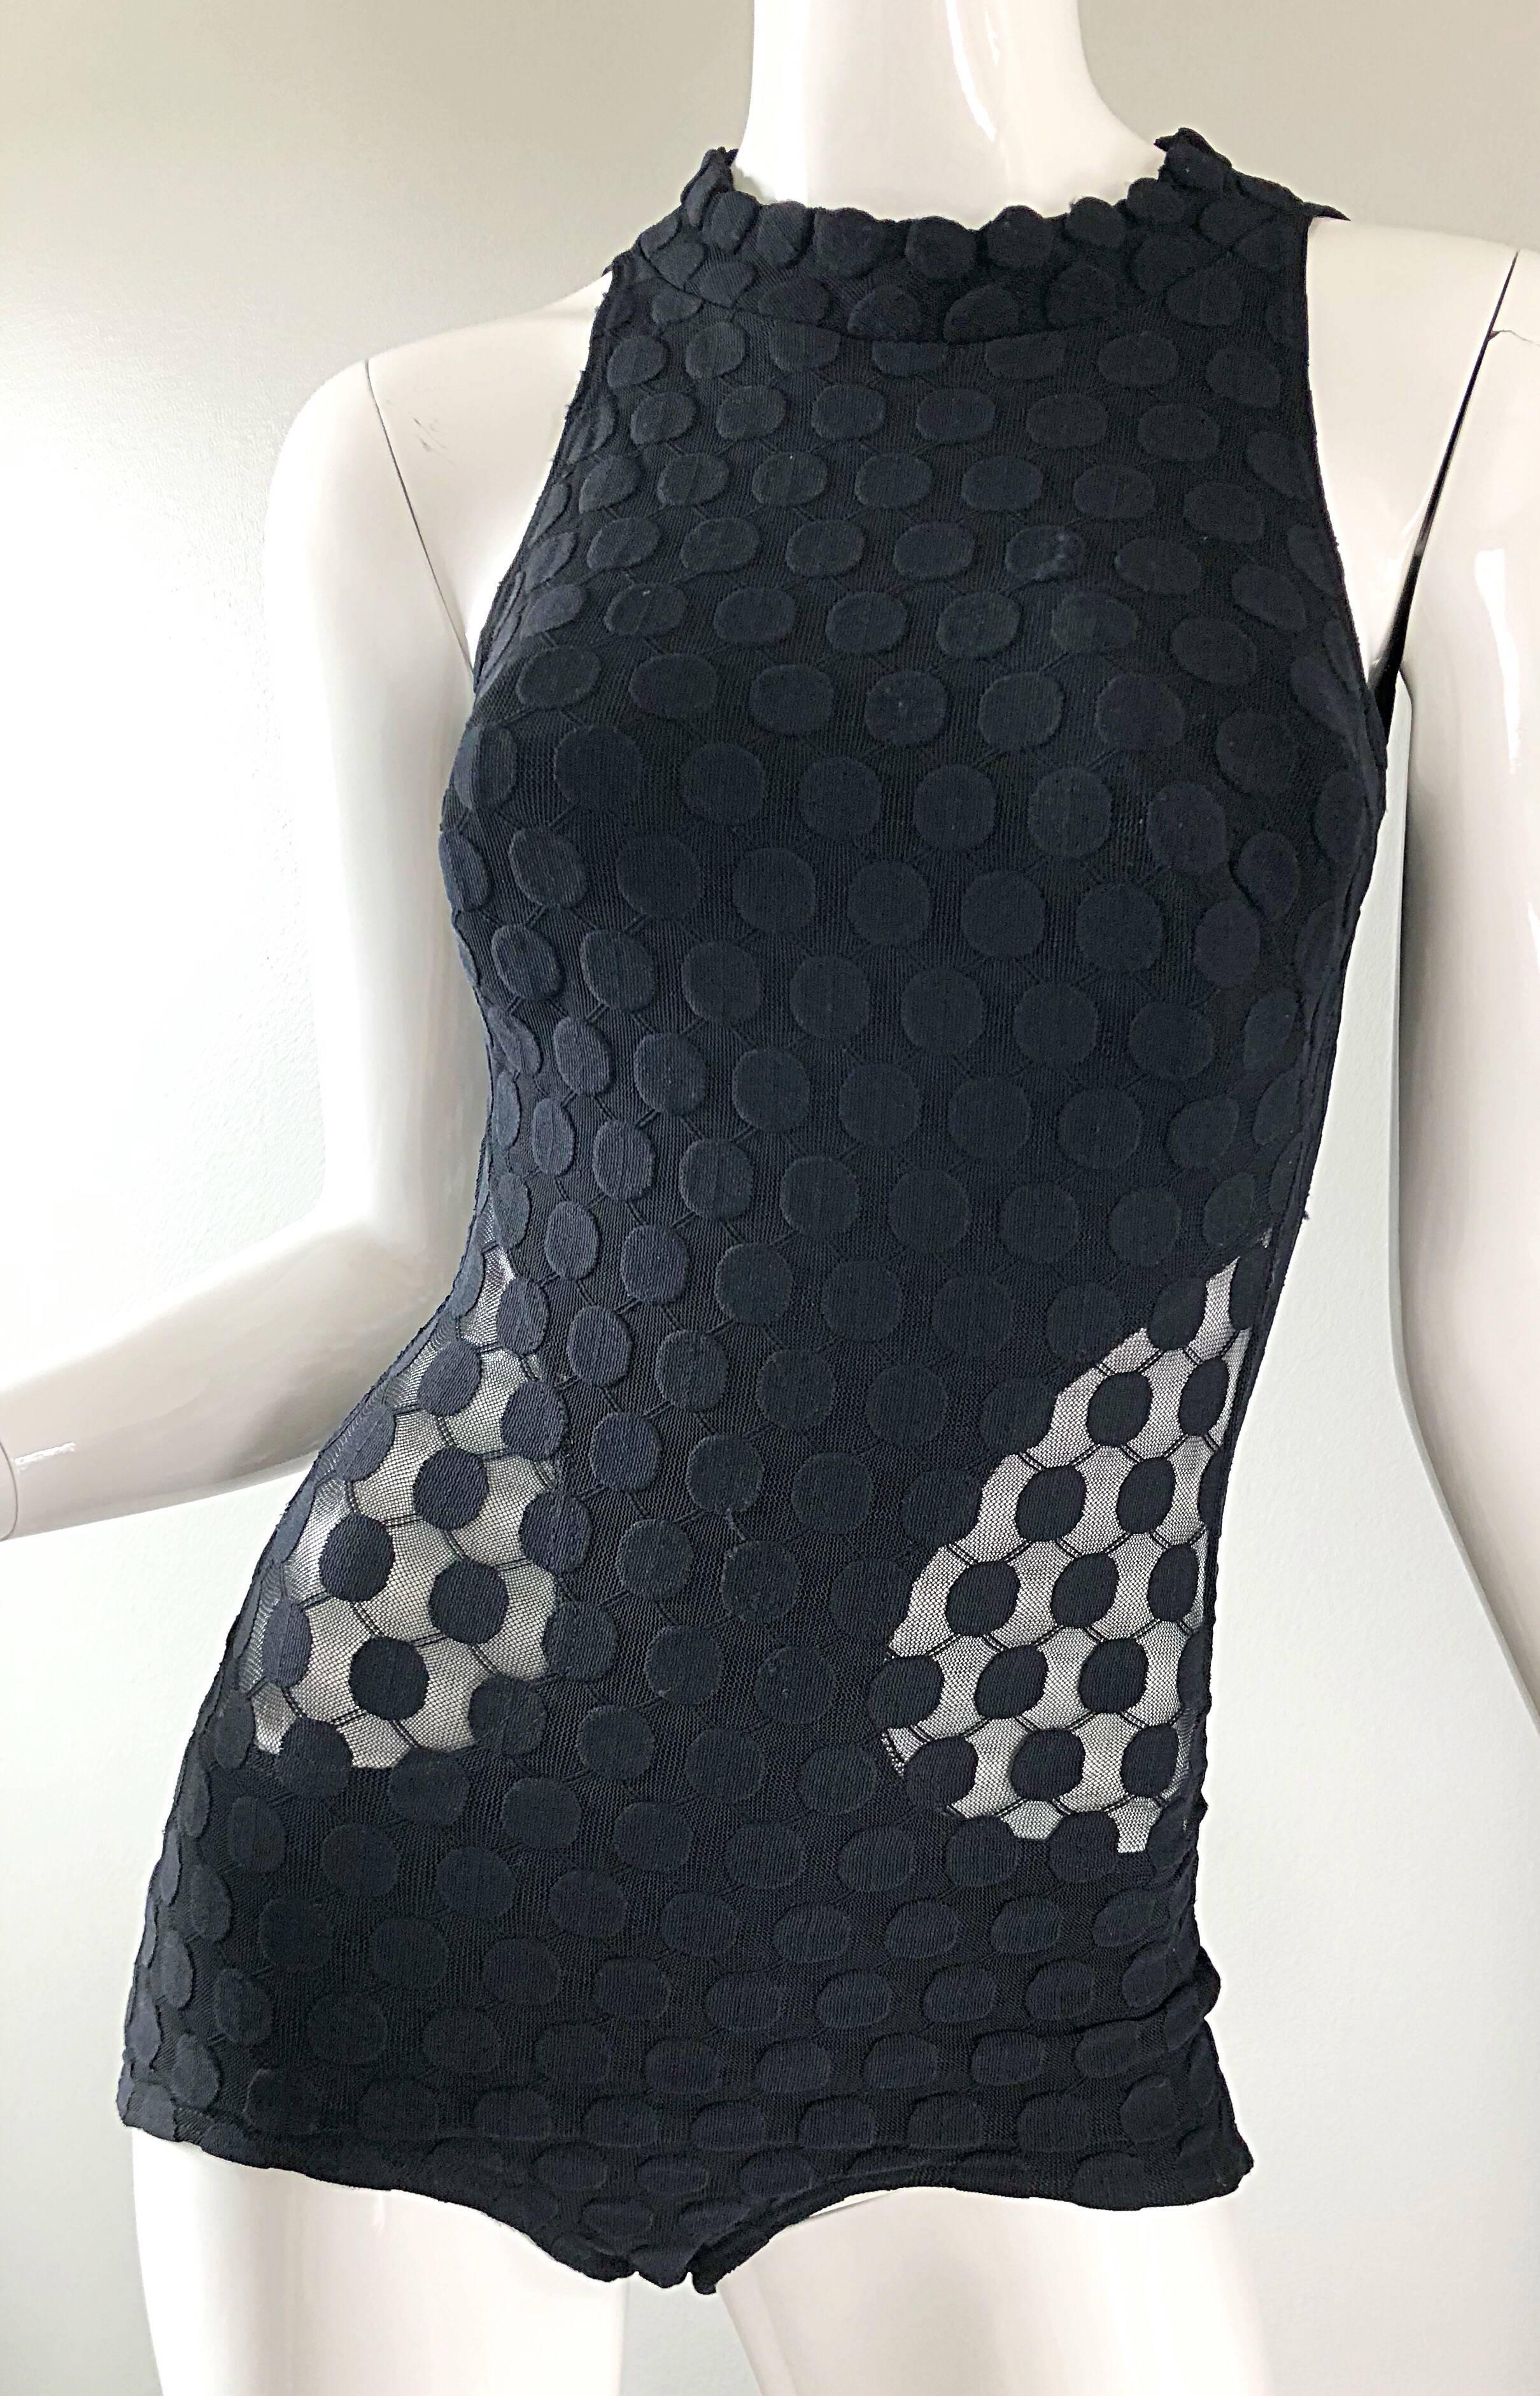 1960s Gottex Black Sheer Cut - Out Sexy One Piece 60s Vintage Swimsuit Bodysuit In Excellent Condition For Sale In San Diego, CA